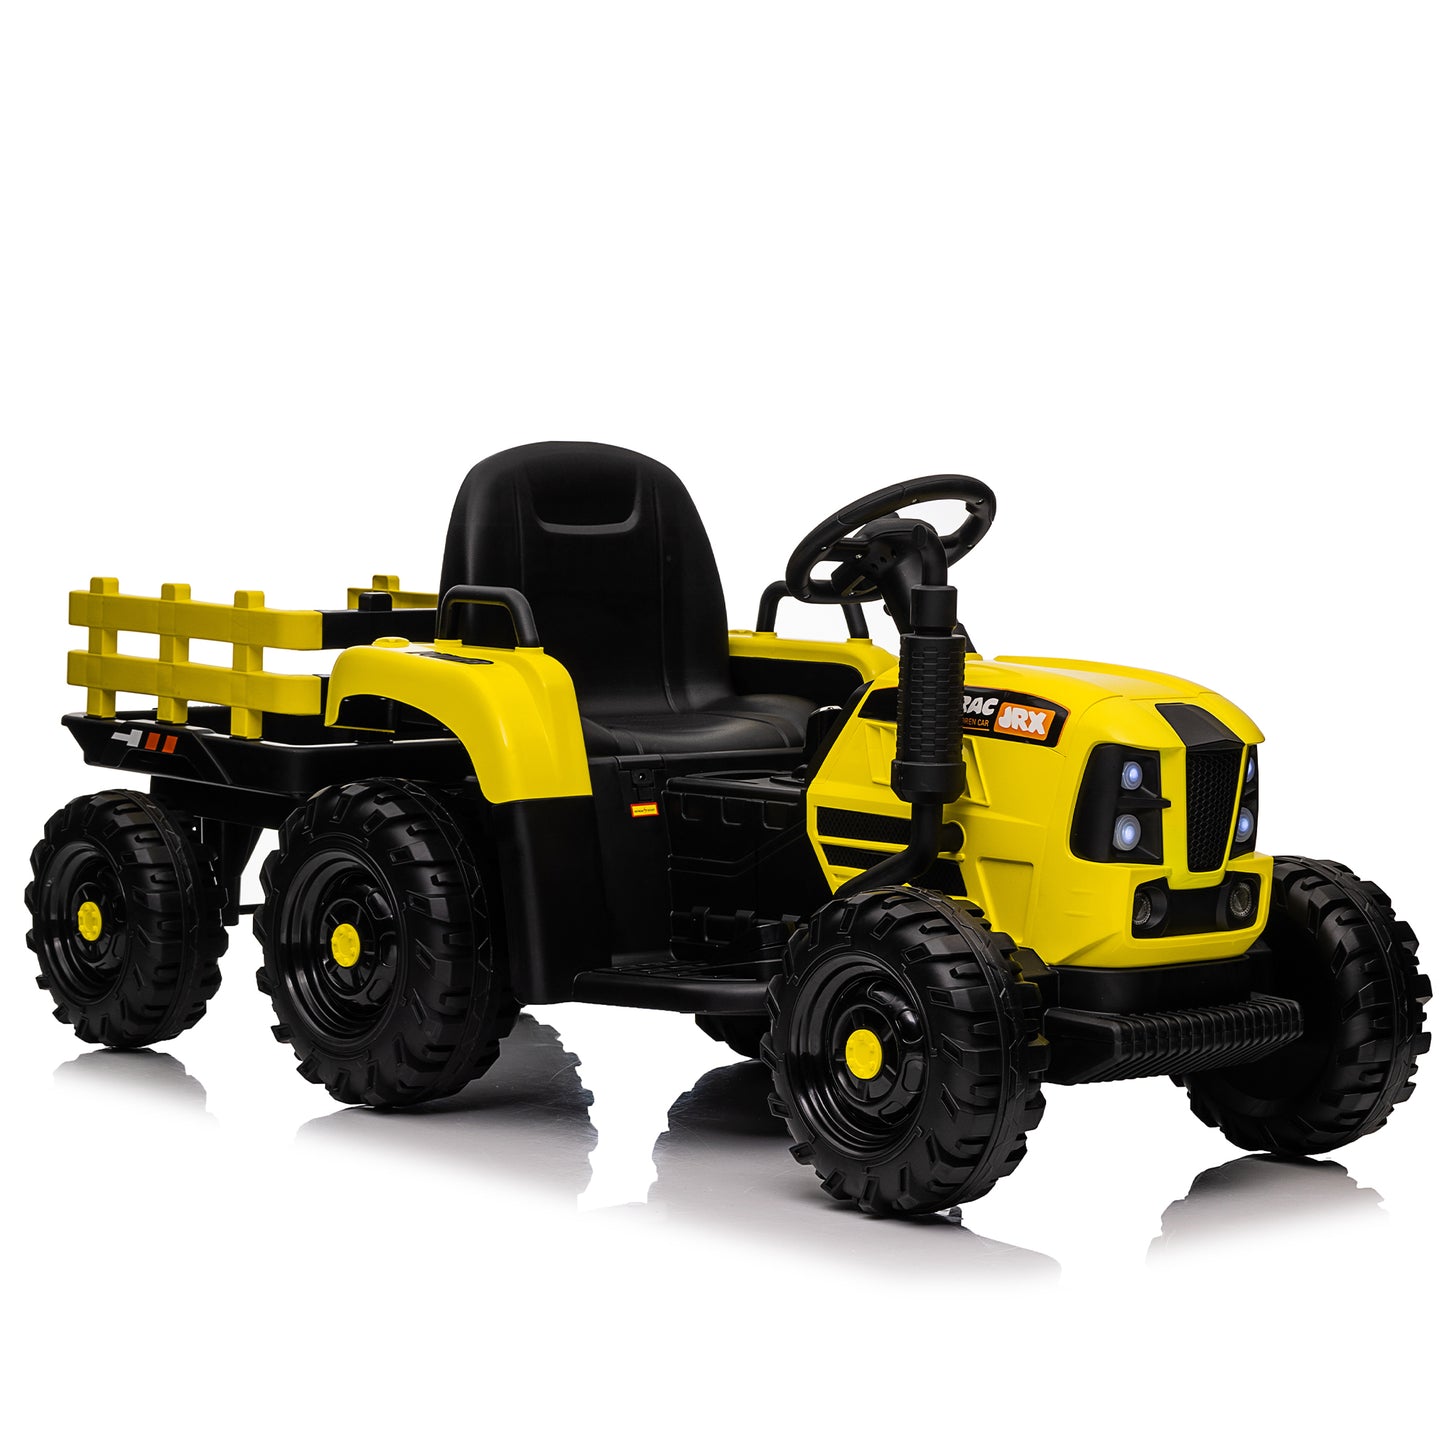 Electric Farm Tractor Ride-On Toy with Remote Control and Realistic Features for Kids, 12V Battery Powered with Music, Lights, and Safety Belt